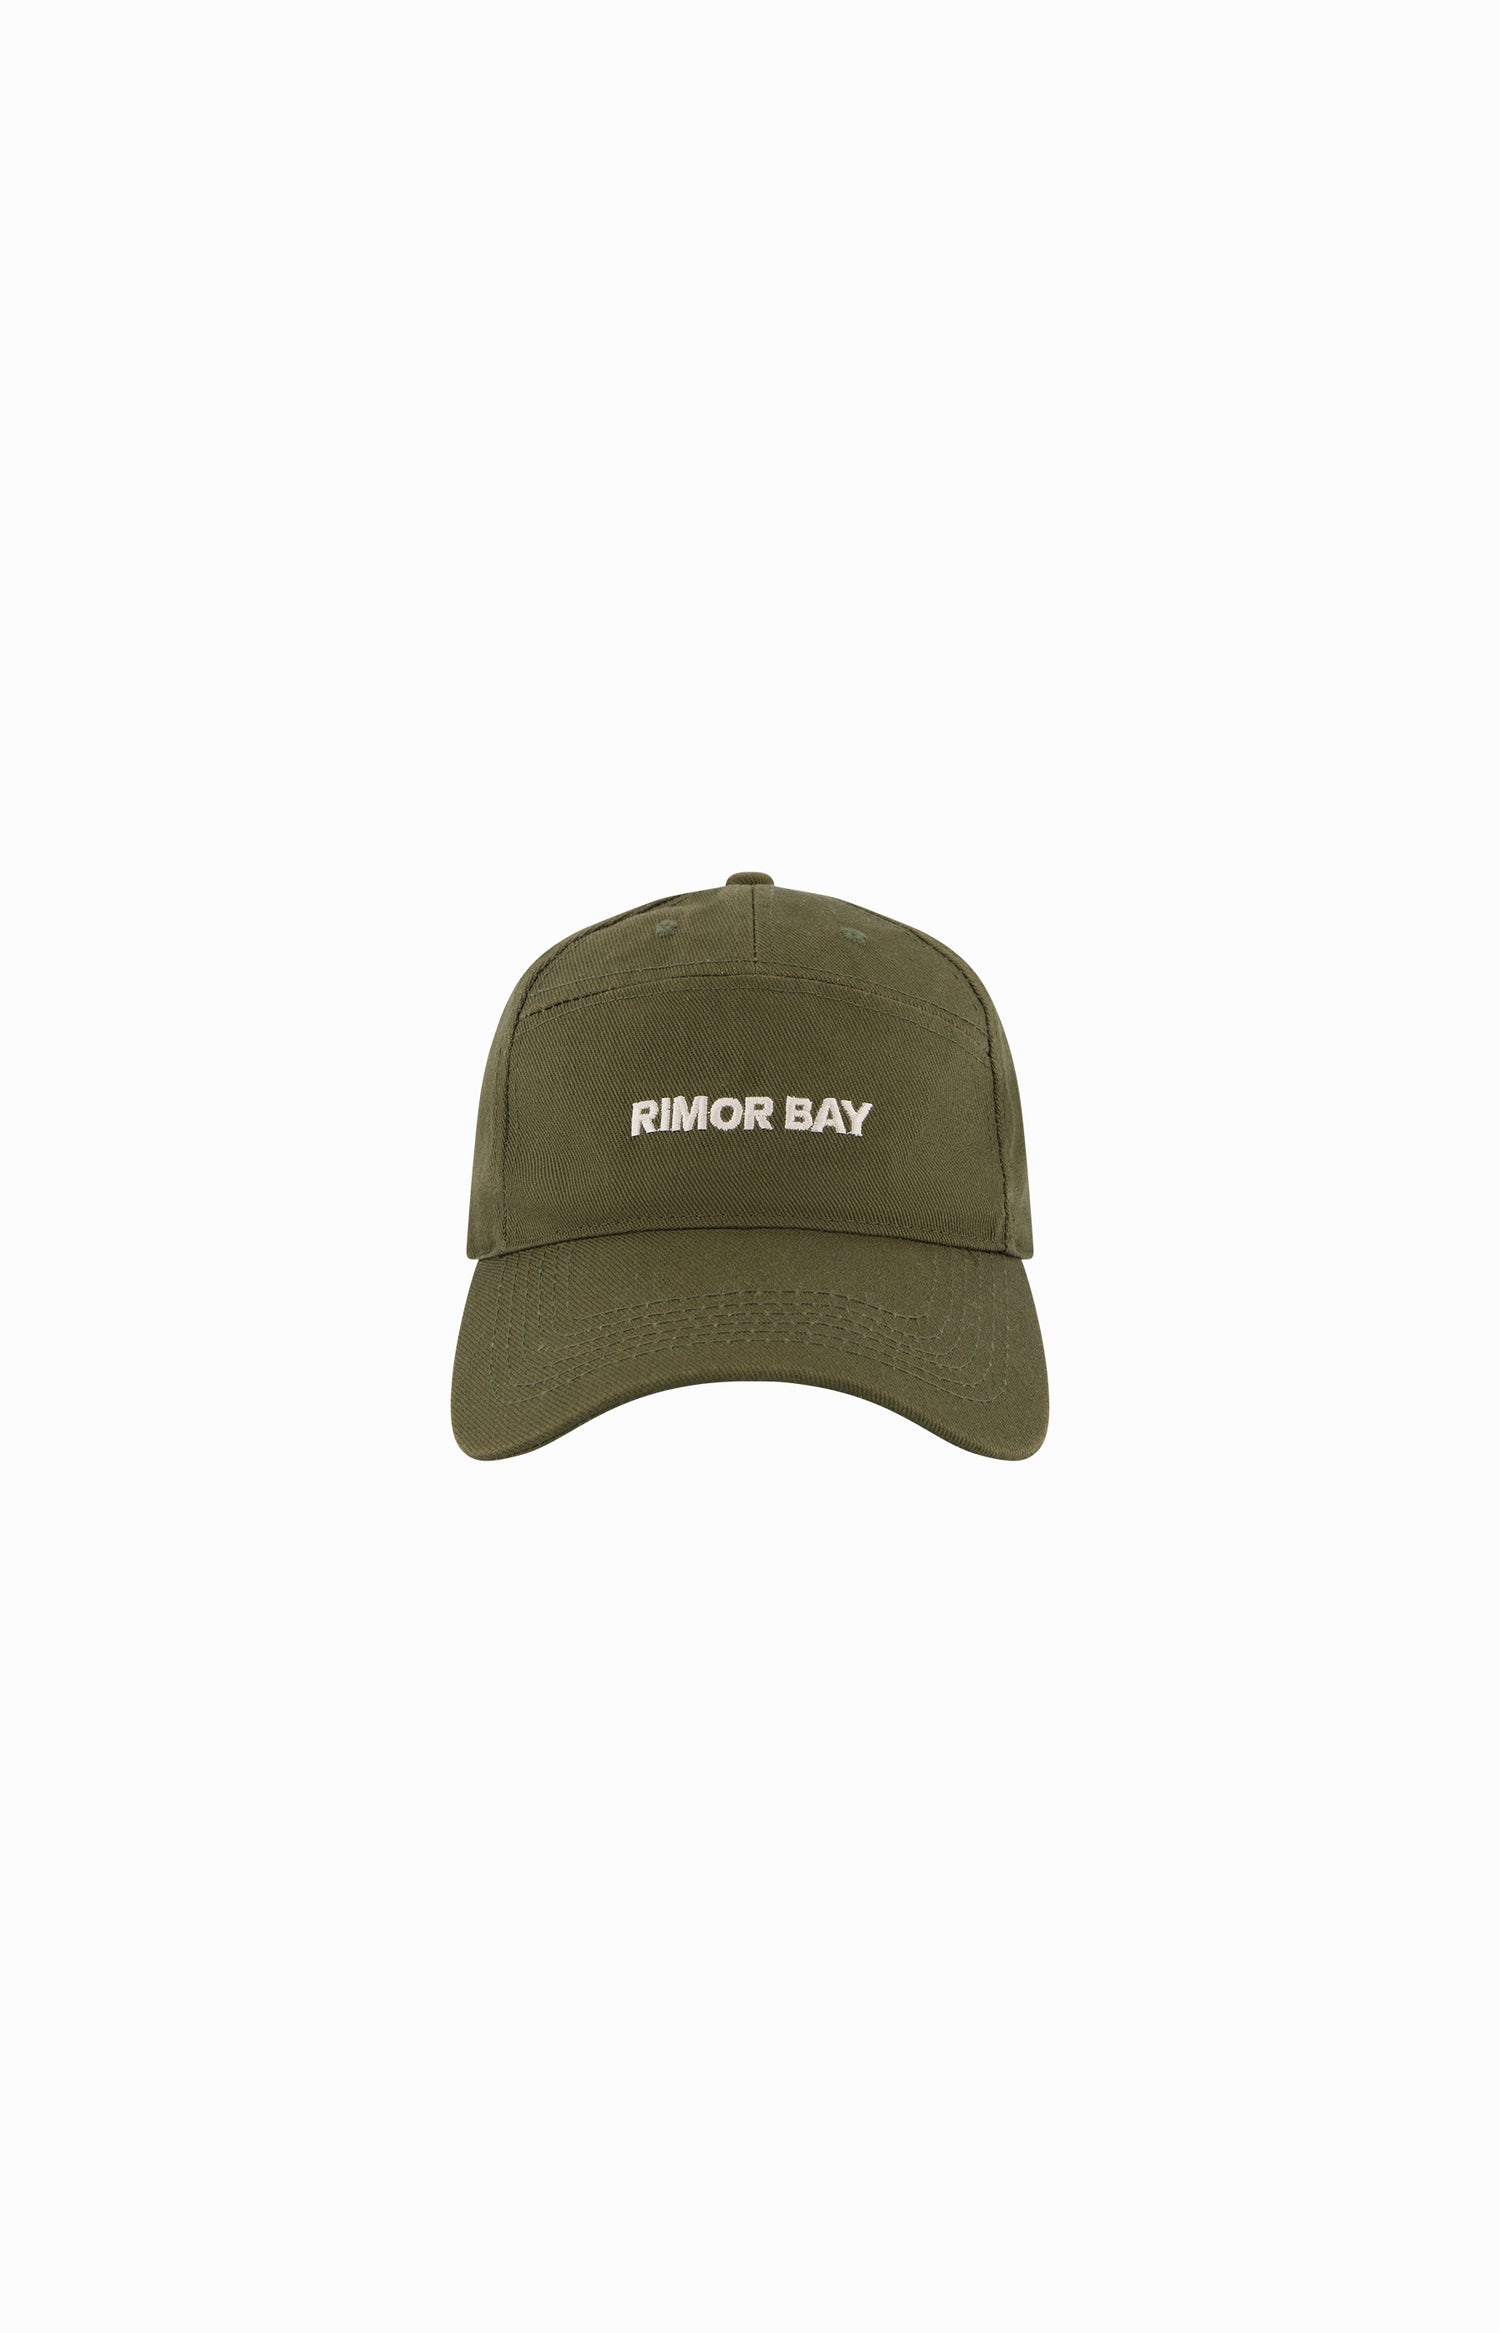 clear cut of Khaki 7 panel cap with logo on front 